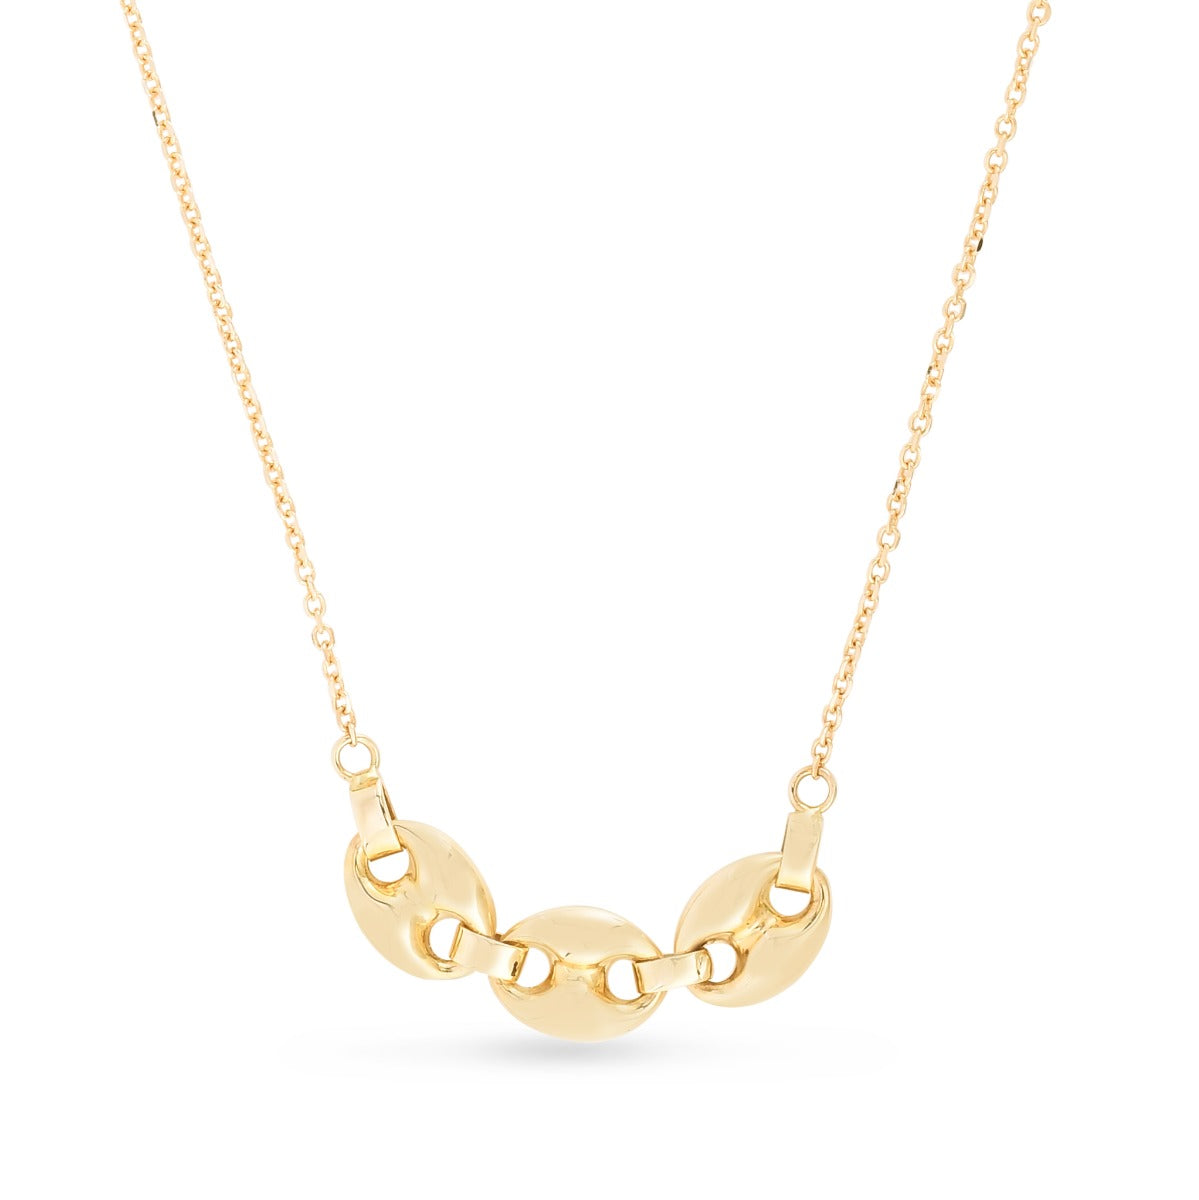 14K Gold Puffed Mariner Drop Necklace with Lobster Clasp